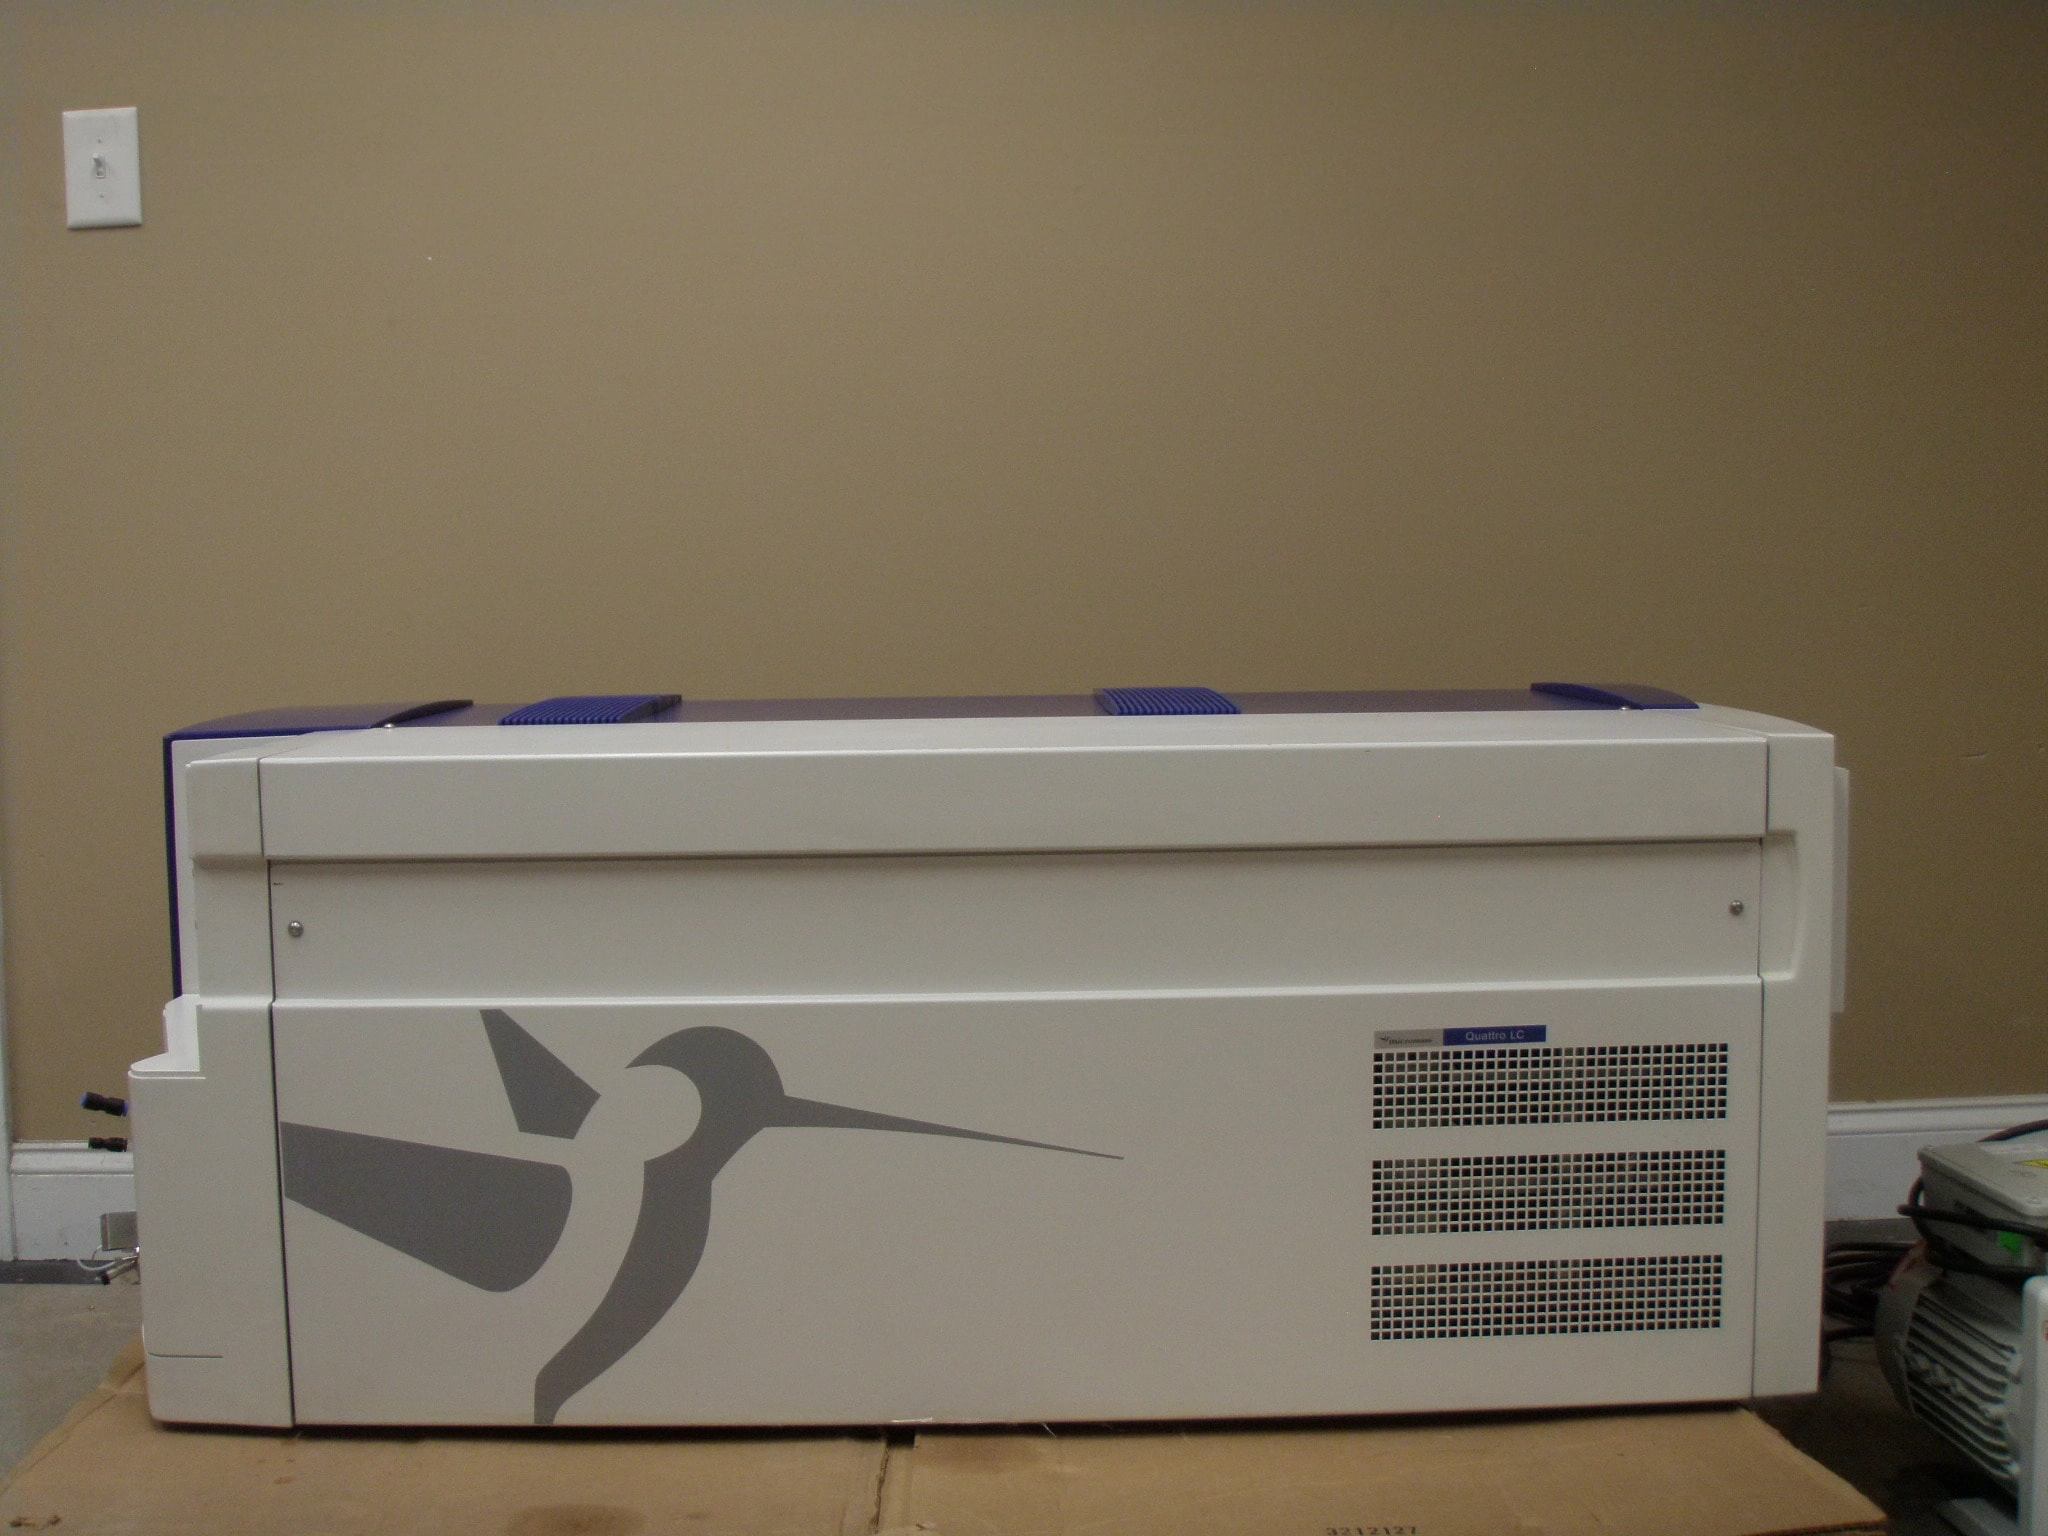 Waters  Micromass Quattro LC Mass Spectrometer, Tested